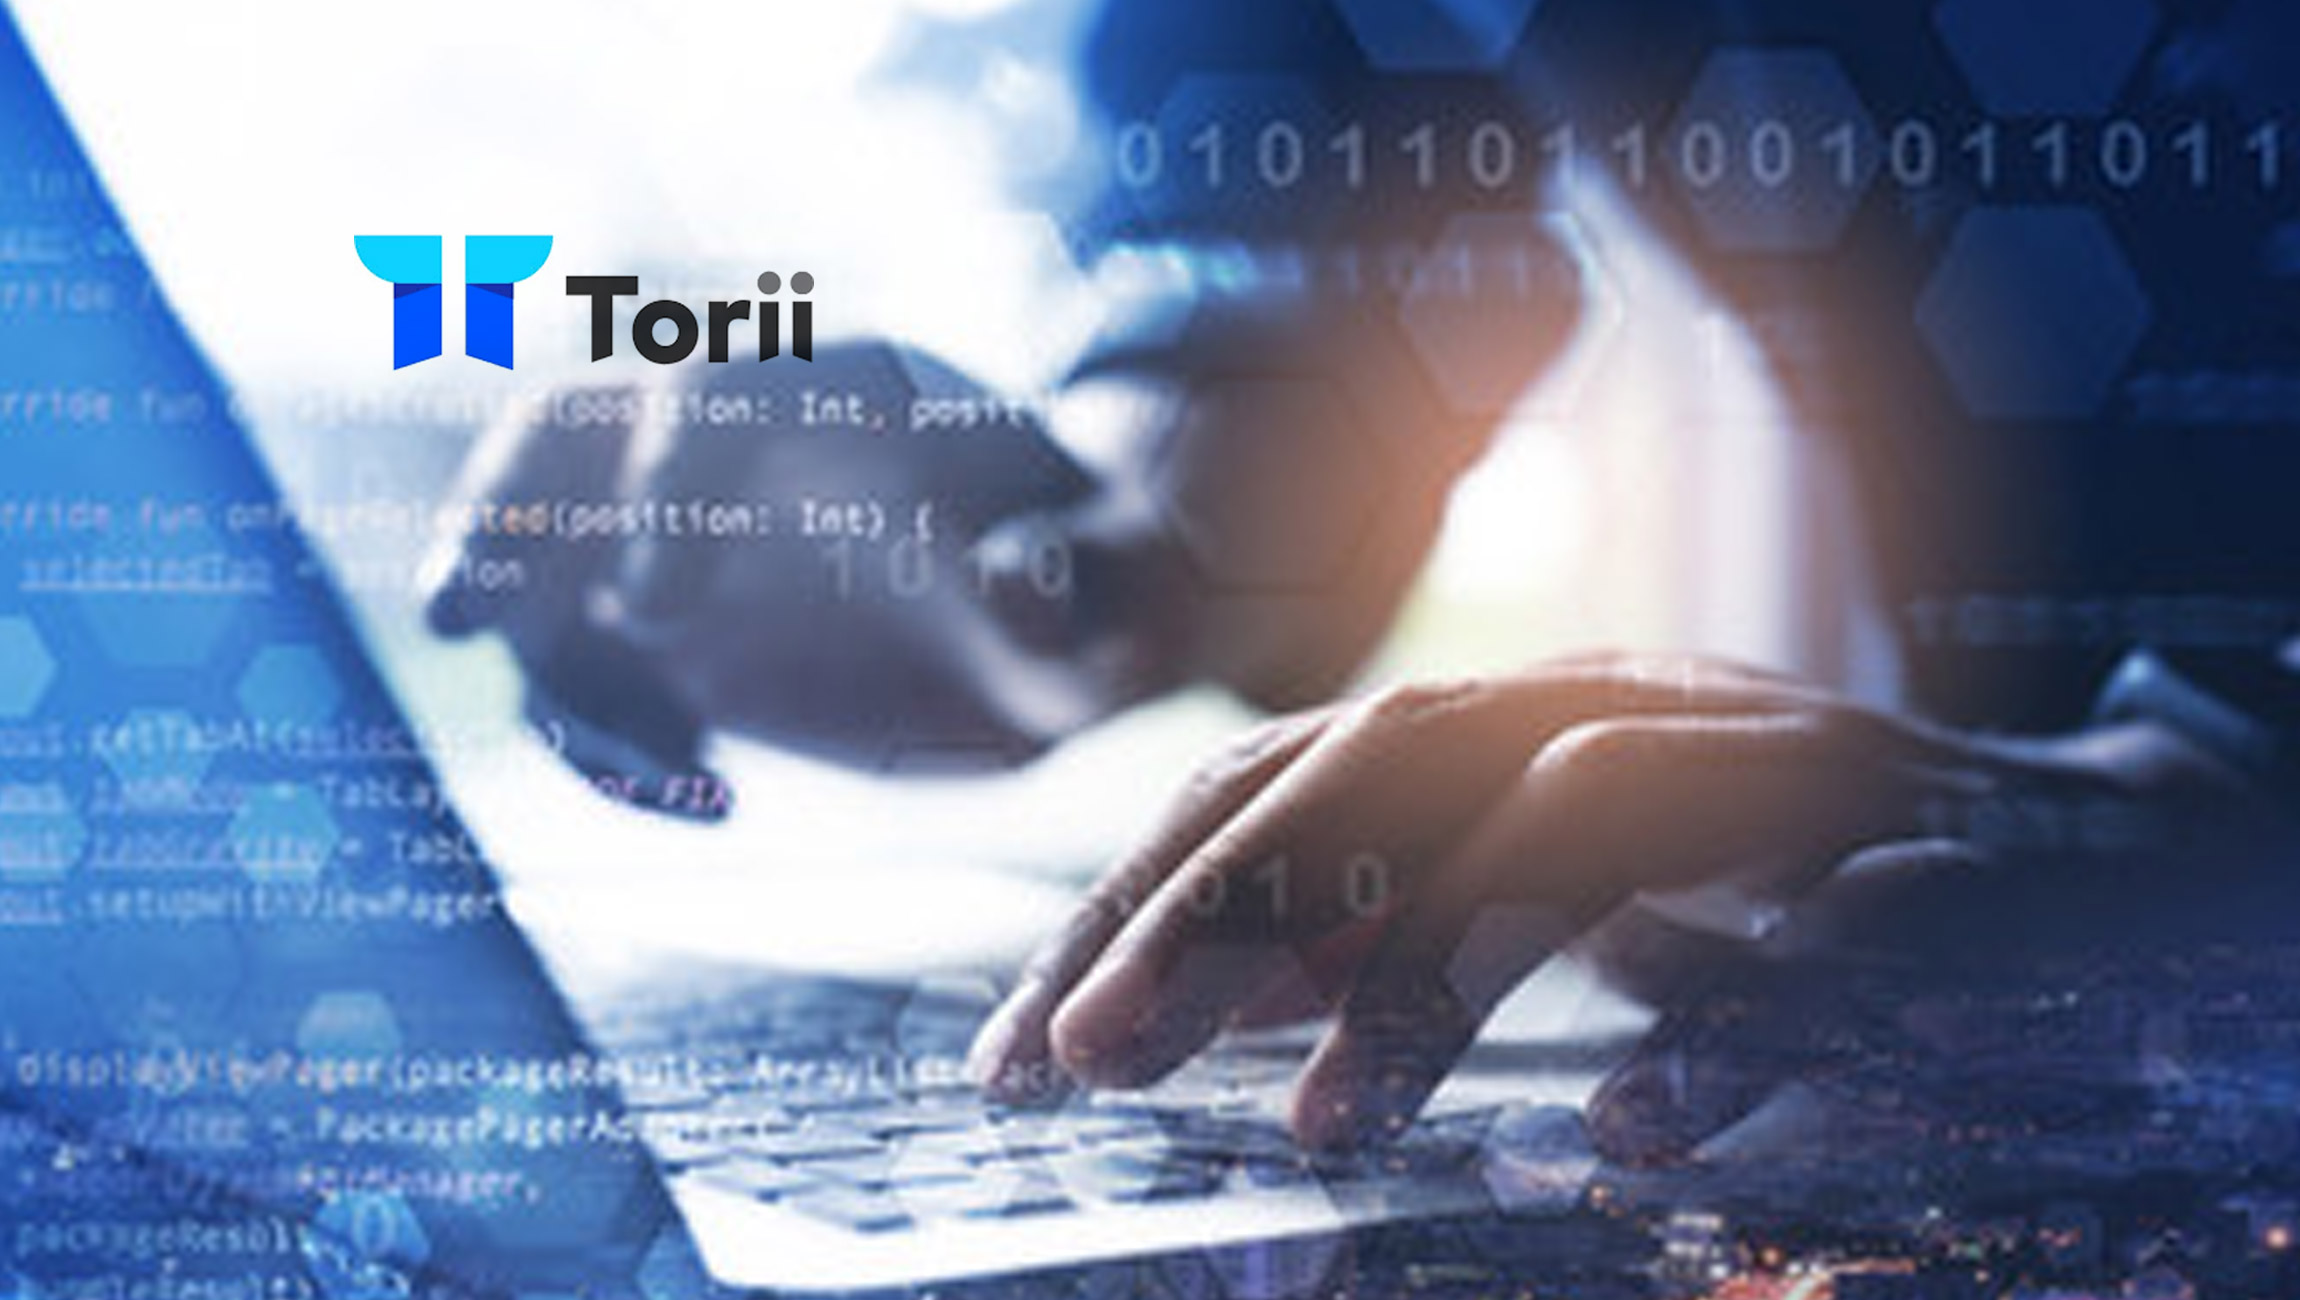 G2 Summer Reports Reveal Torii’s Dominance in Lowering True Cost of Software